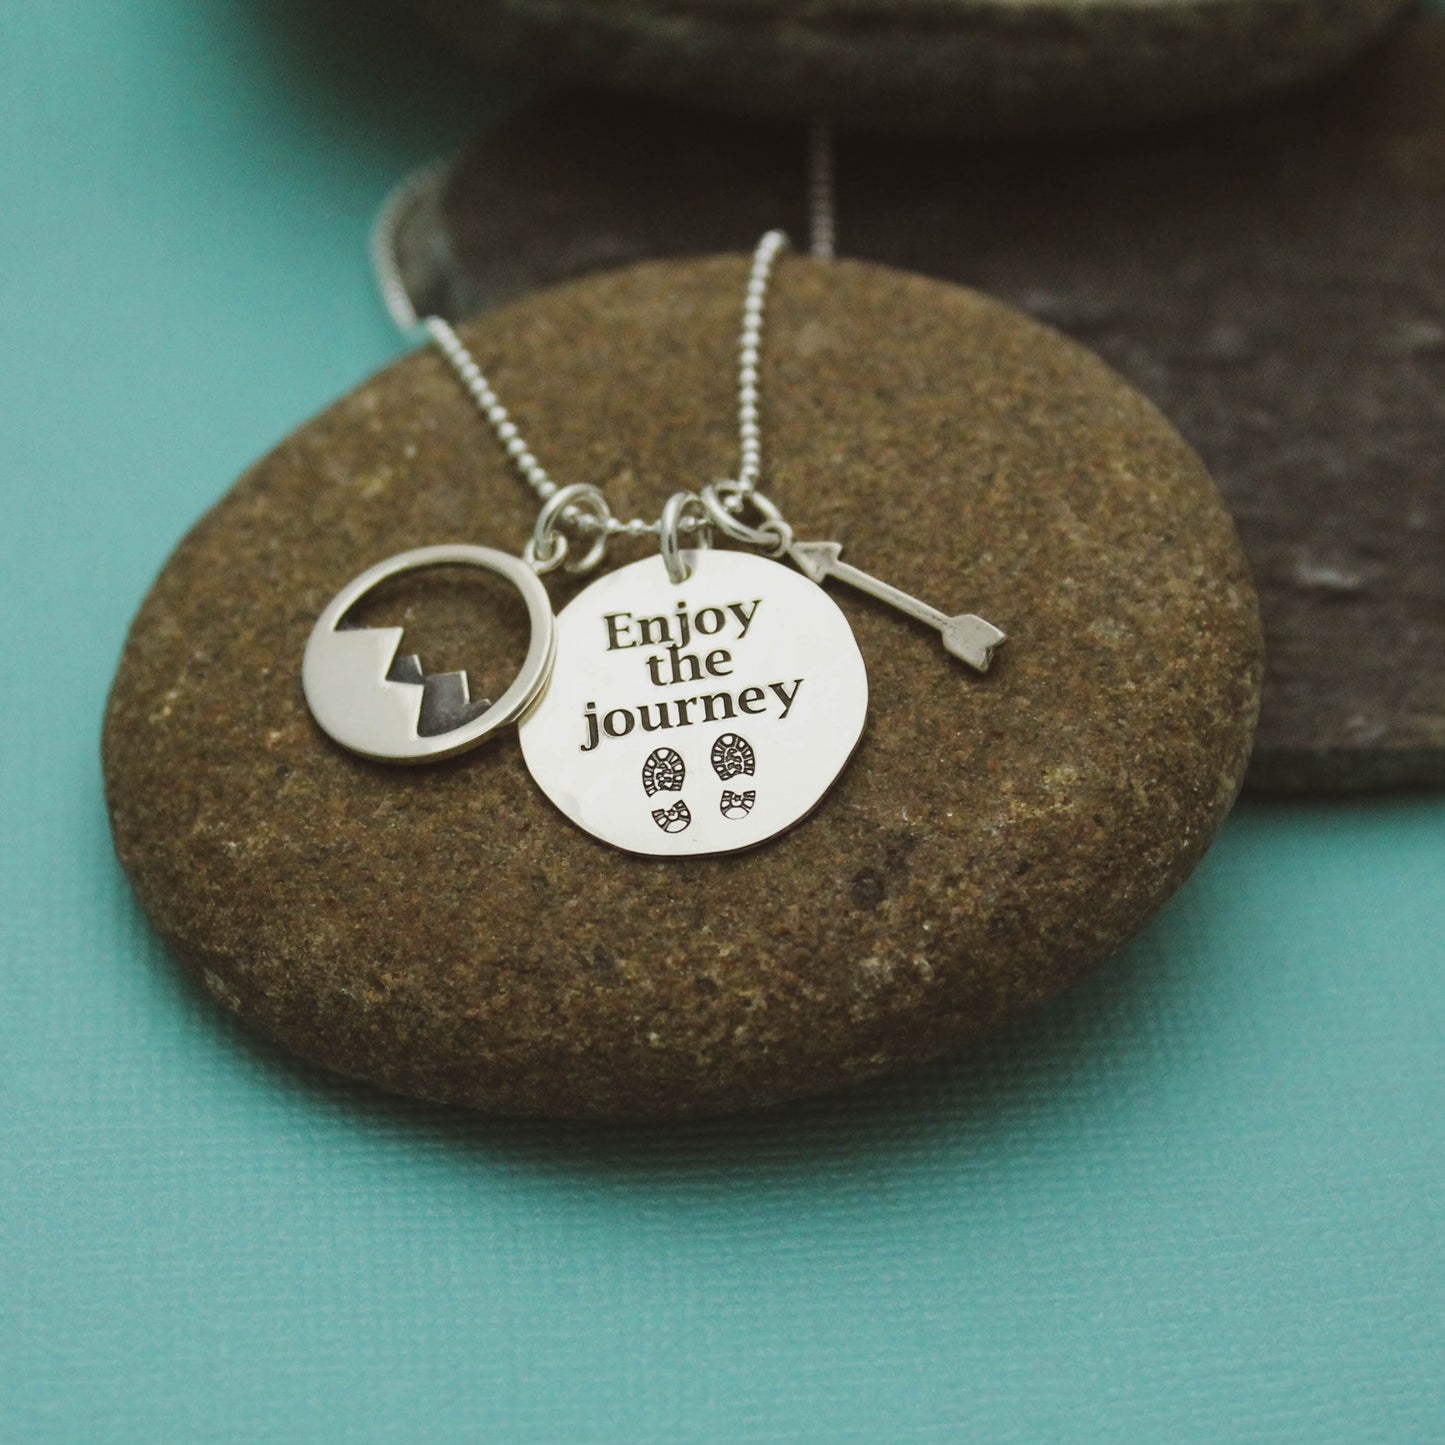 Enjoy the Journey Necklace, Hiking Necklace, Mountain Jewelry, Graduation Gift, Hand Stamped Necklace, Adventure Jewelry, Hiker Necklace